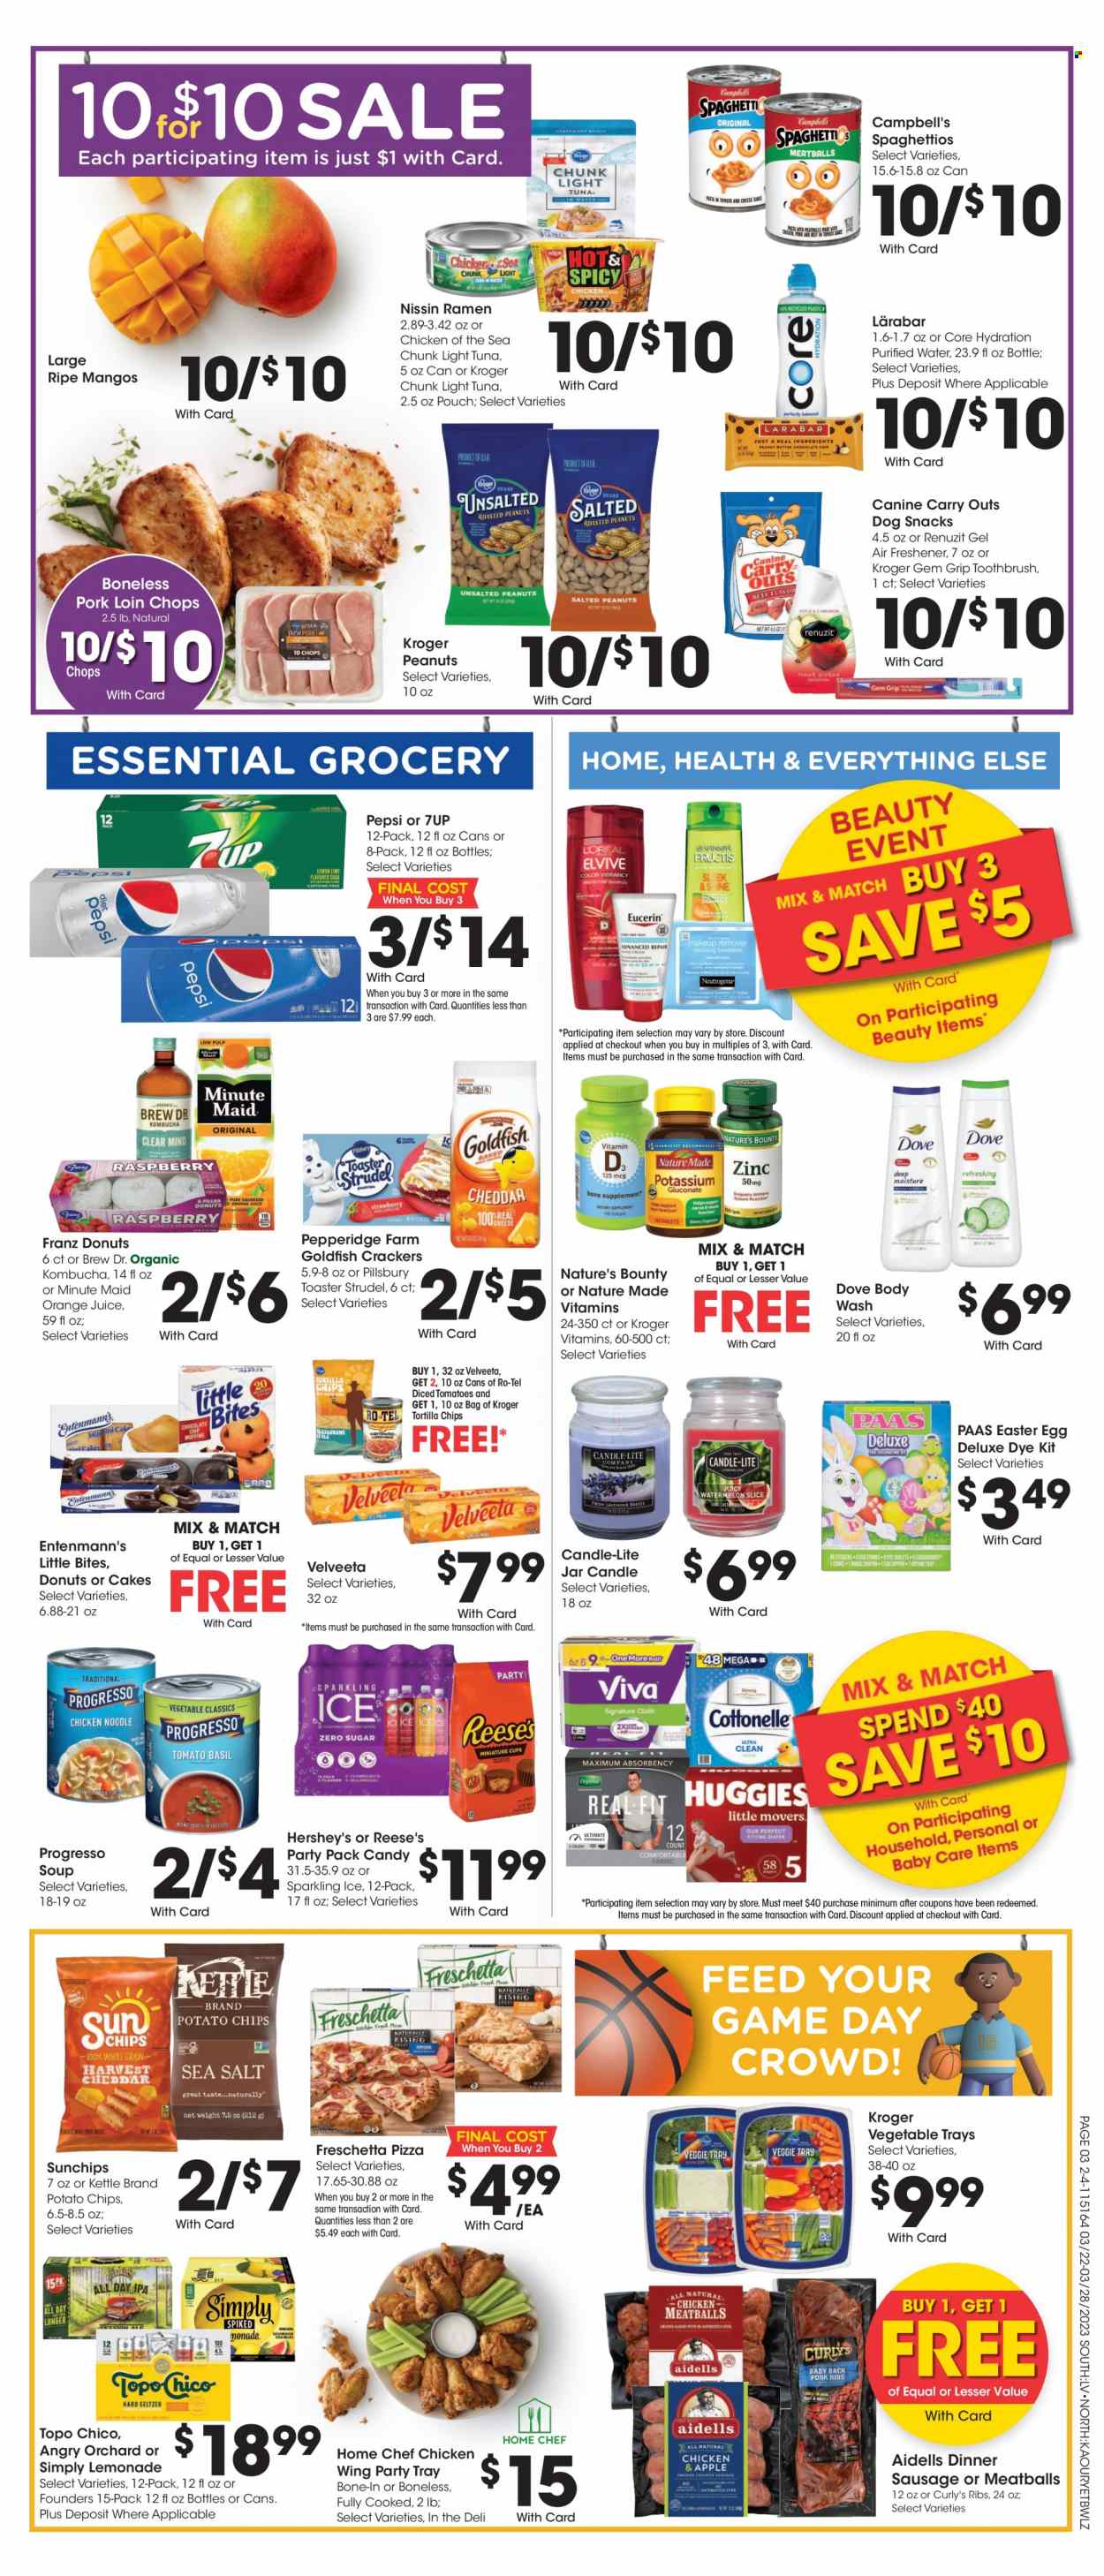 thumbnail - Fred Meyer Flyer - 03/22/2023 - 03/28/2023 - Sales products - strudel, donut, Entenmann's, Campbell's, ramen, spaghetti, pizza, meatballs, Pillsbury, noodles, Progresso, Nissin, sausage, cheese, Reese's, Hershey's, Dove, snack, easter egg, crackers, Little Bites, tortilla chips, potato chips, chips, Goldfish, light tuna, Chicken of the Sea, diced tomatoes, peanuts, lemonade, Pepsi, orange juice, juice, 7UP, fruit punch, purified water, water, kombucha, beer, IPA, ribs, pork chops, pork loin, pork meat, Huggies, Cottonelle, body wash, toothbrush, L’Oréal, Fructis, Eucerin, fork, cup, pen, candle, Renuzit, air freshener, Nature Made, Nature's Bounty, zinc. Page 5.